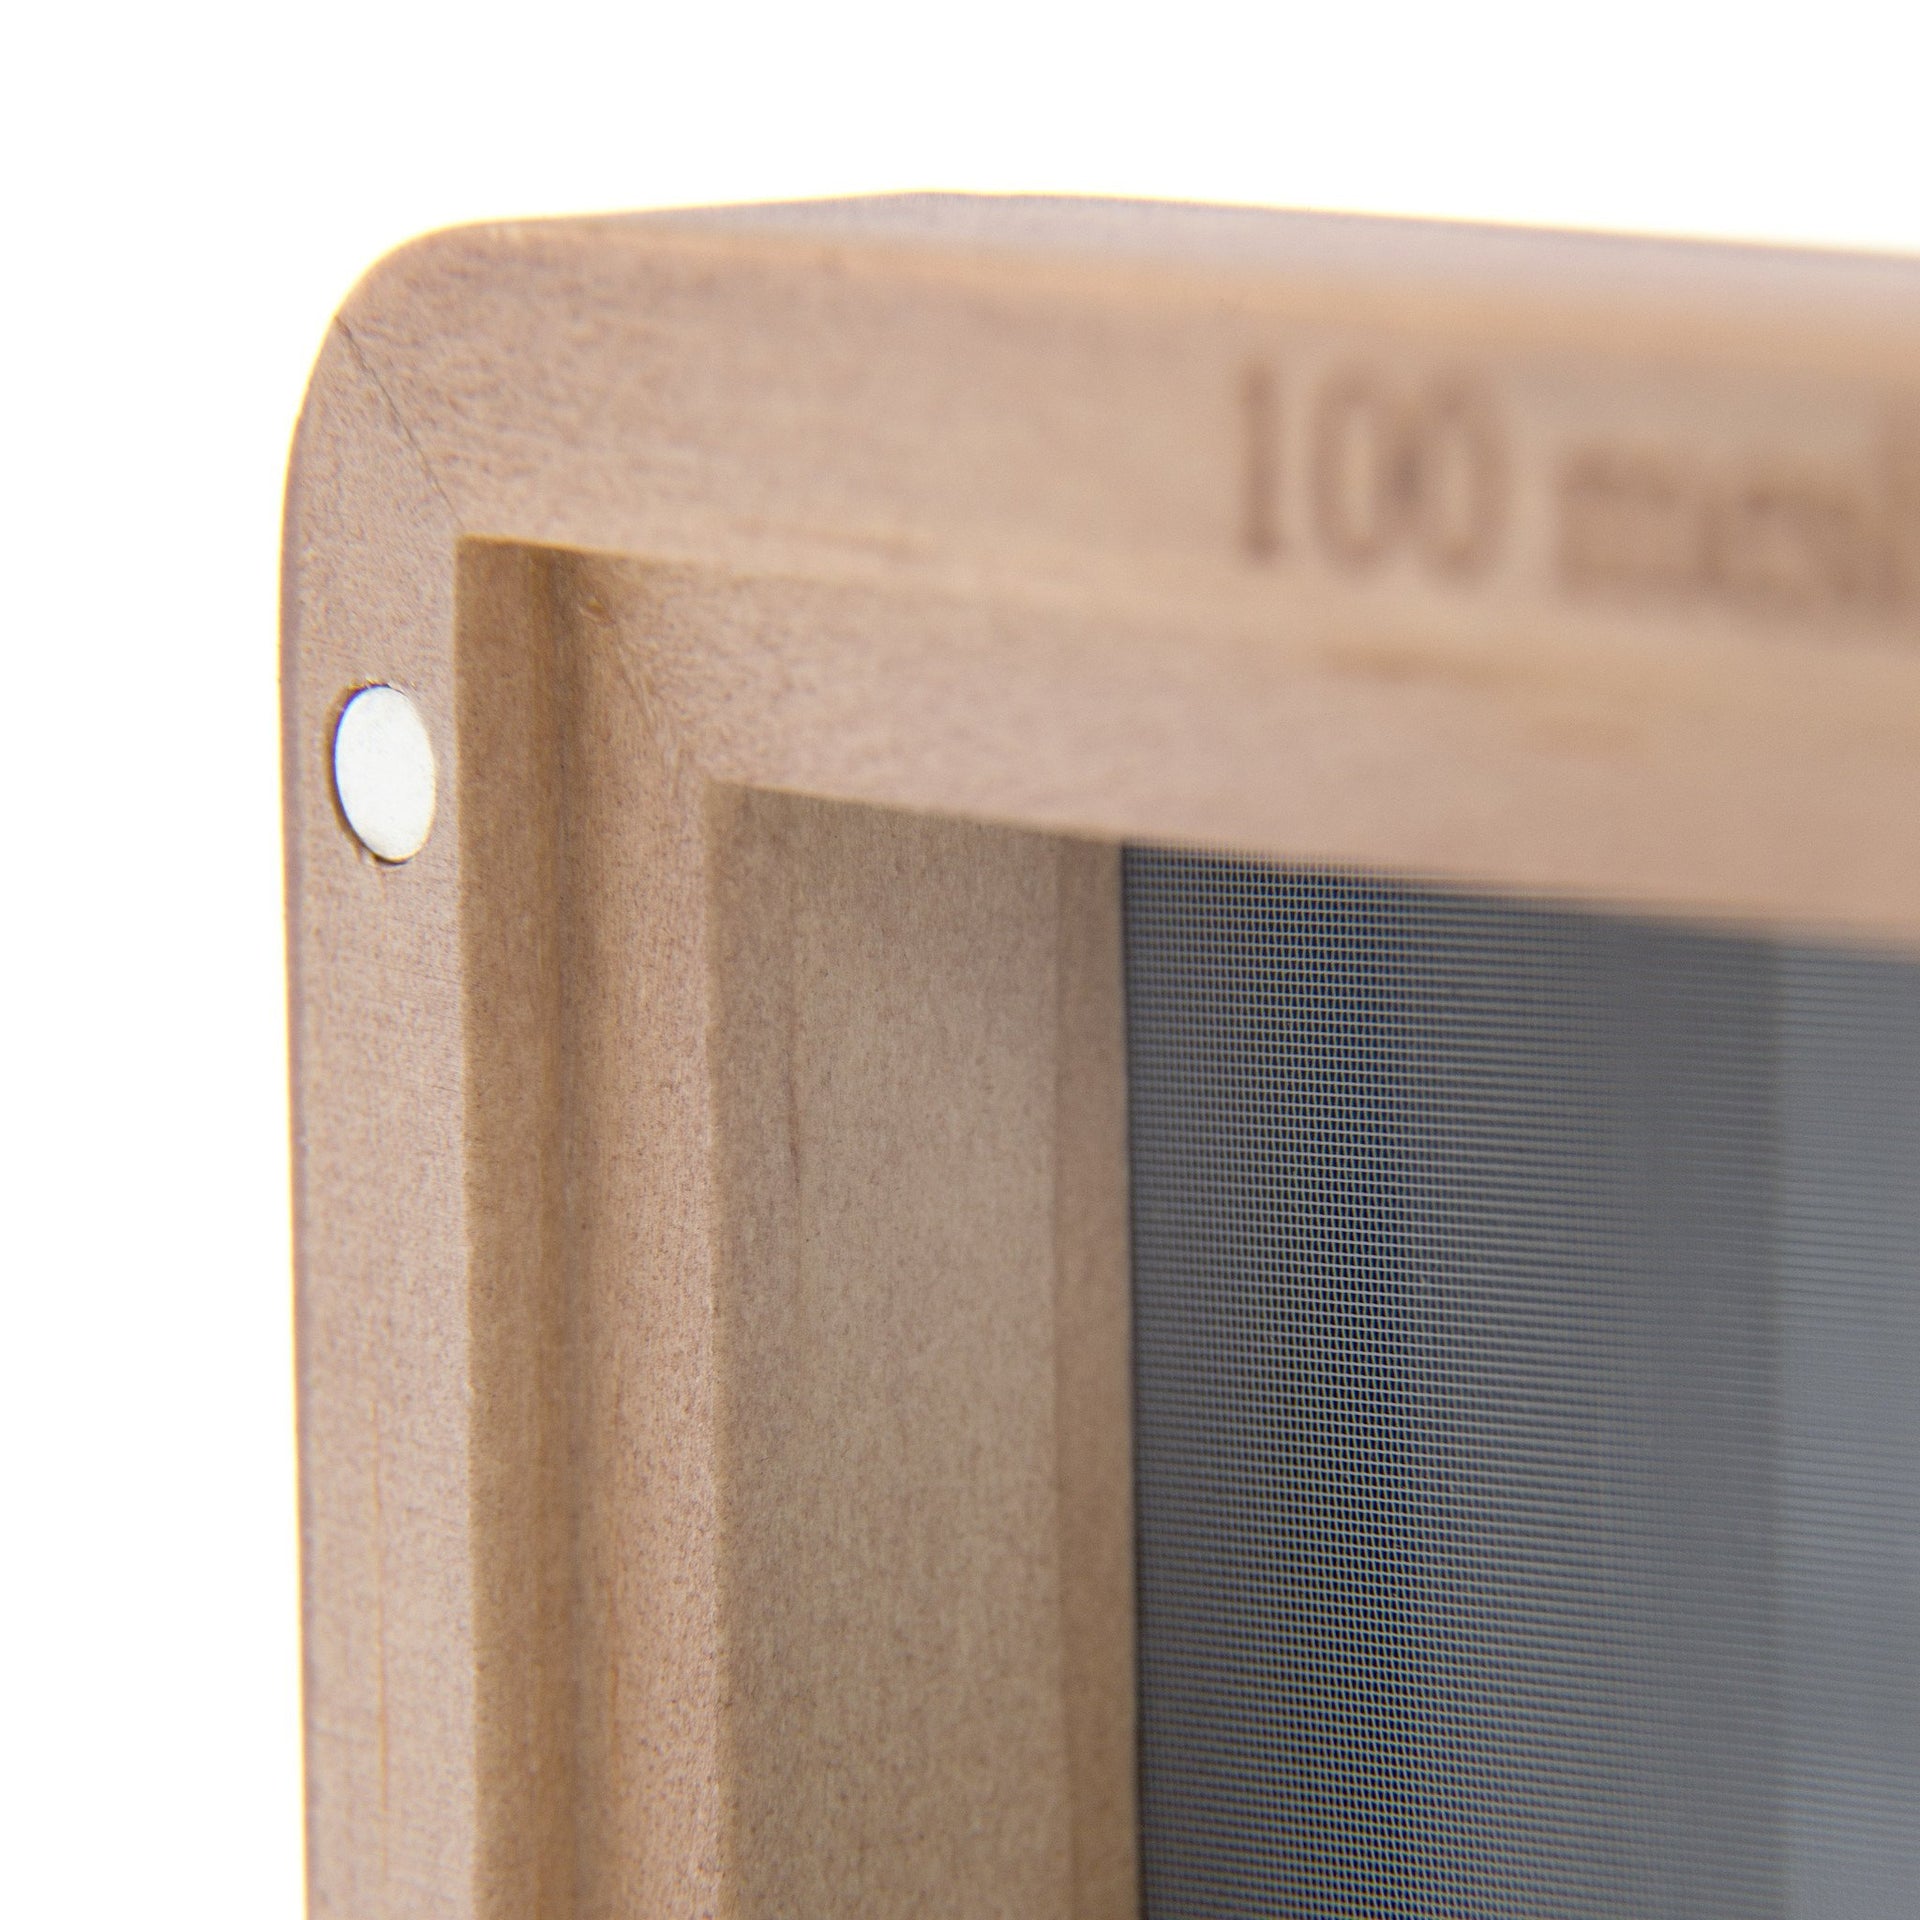 RYOT 3x5 Solid Top Screen Box - Walnut - 420 Science - The most trusted online smoke shop.